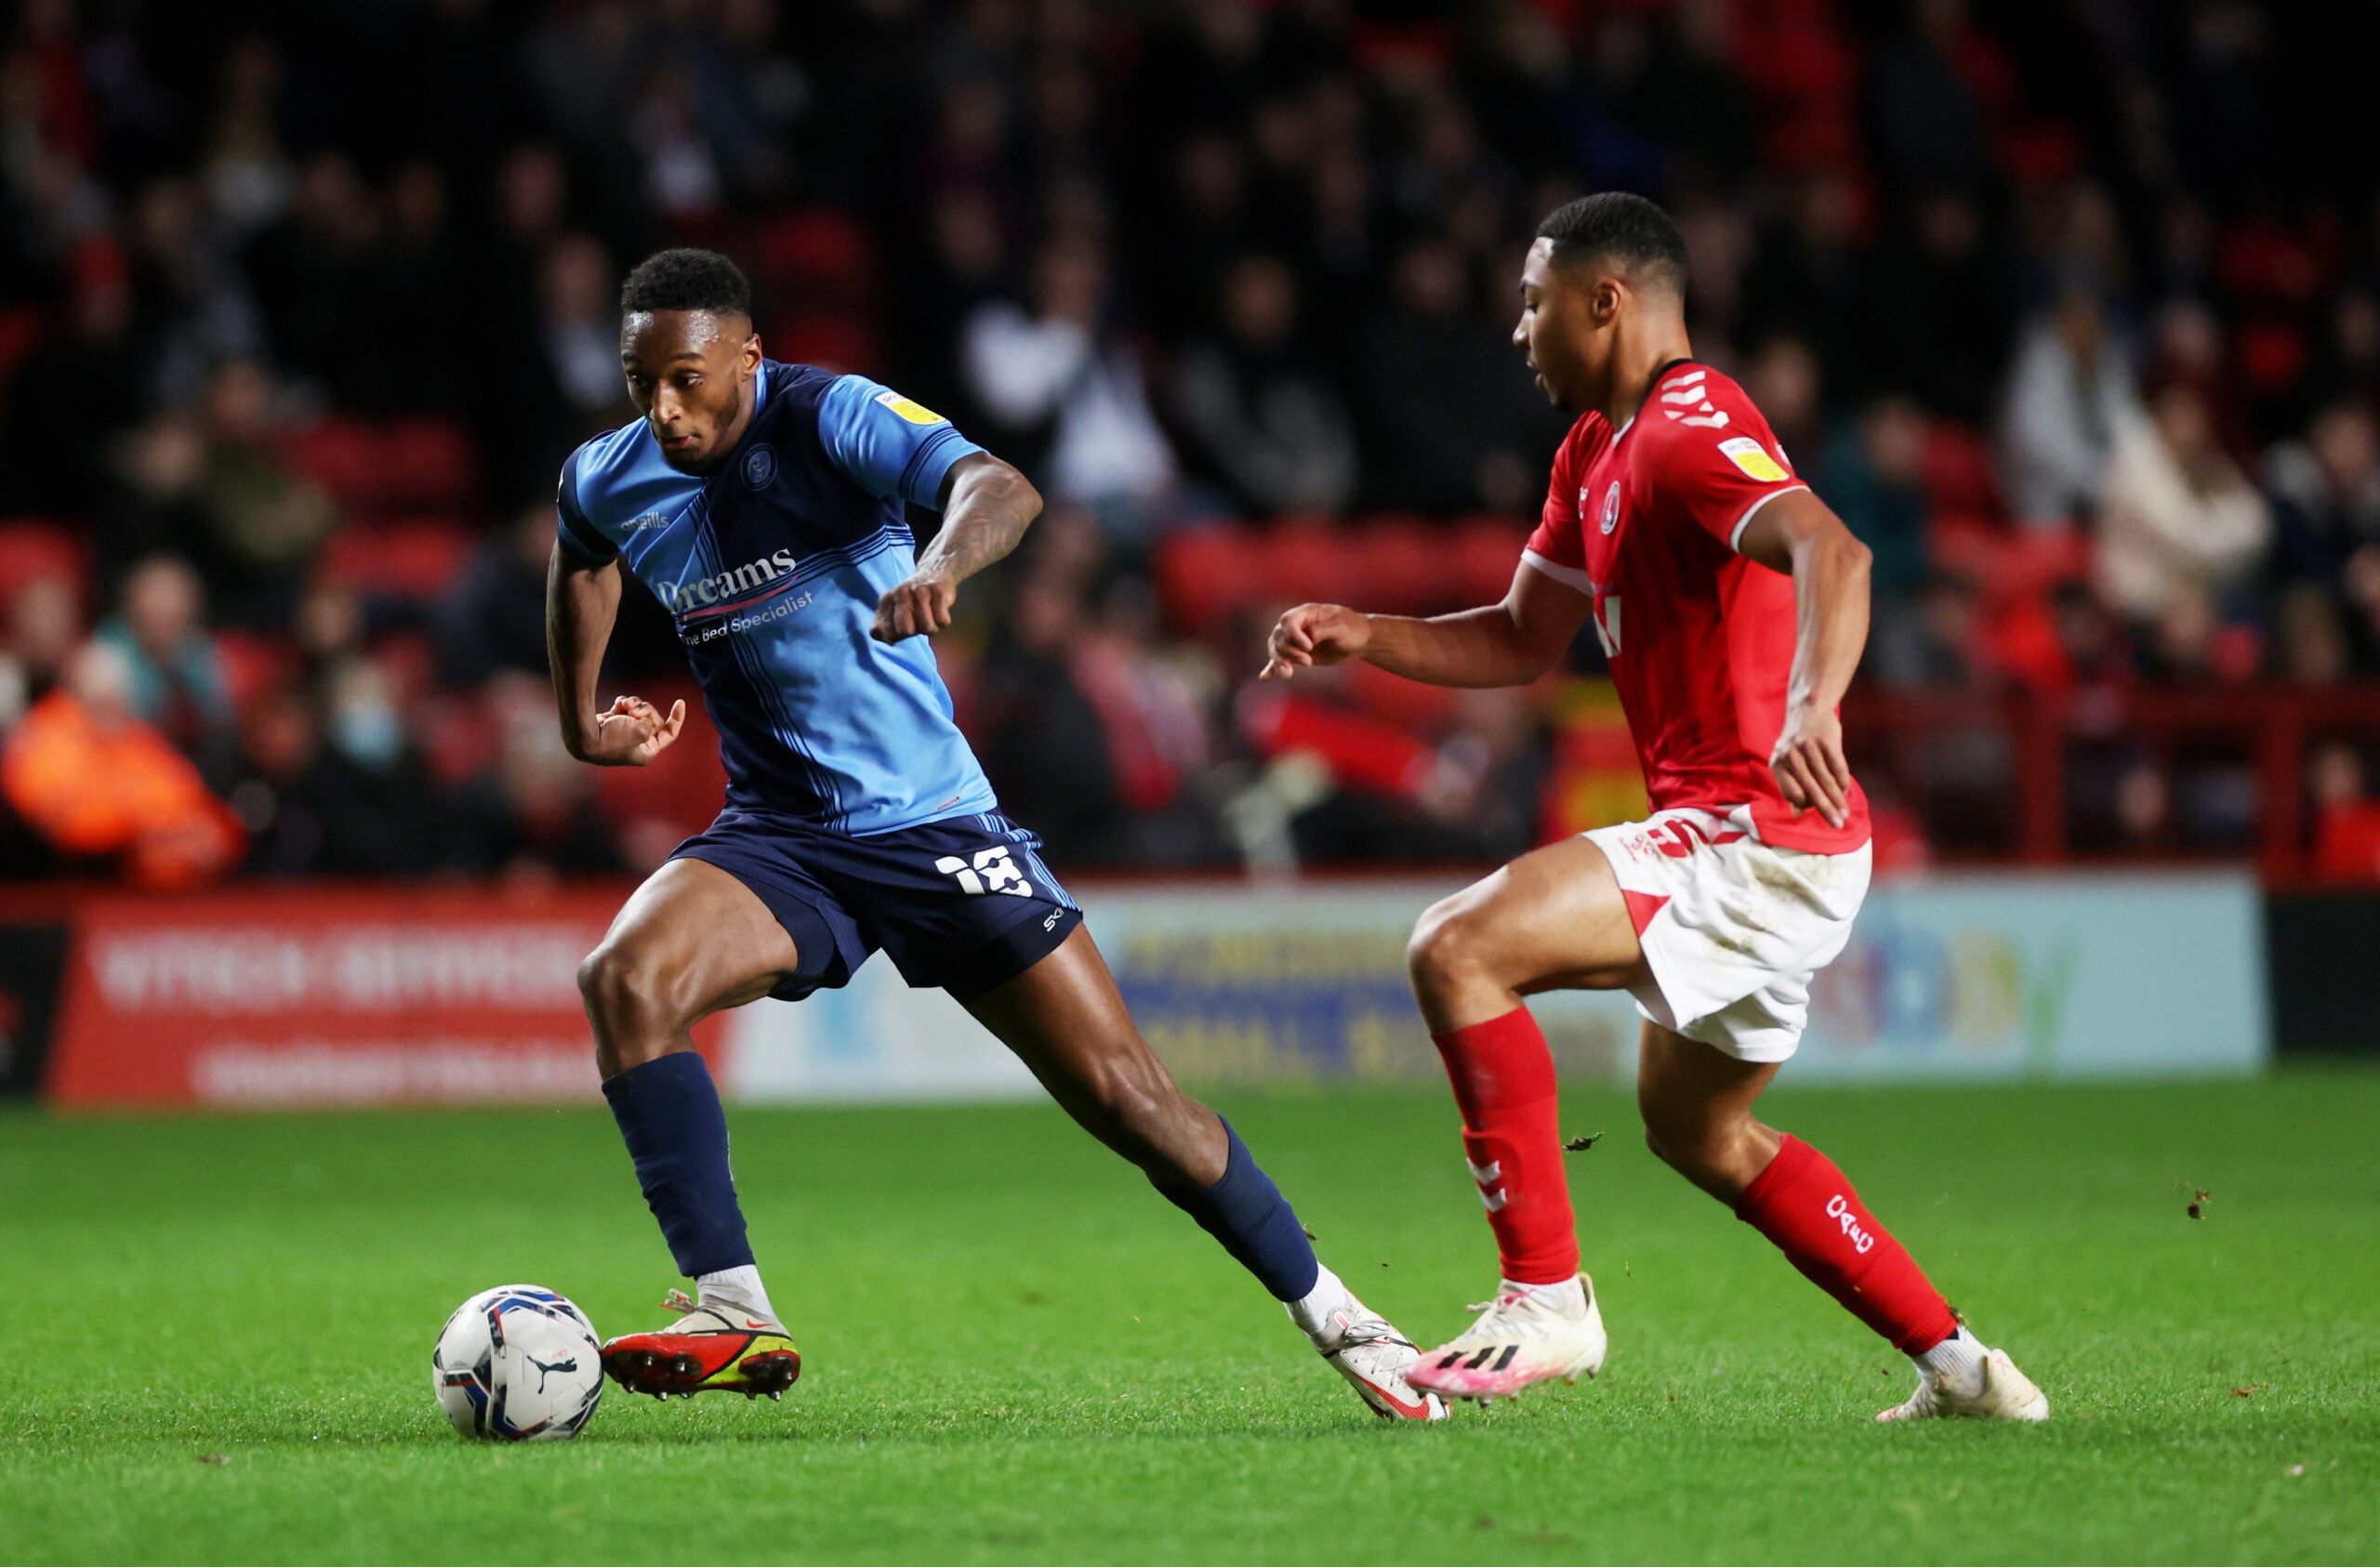 Soccer Football - League One - Charlton Athletic v Wycombe Wanderers - The Valley, London, Britain - January 1, 2022 Charlton Athletic's Akin Famewo in action with Wycombe Wanderers' Brandon Hanlan   Action Images/Matthew Childs  EDITORIAL USE ONLY. No use with unauthorized audio, video, data, fixture lists, club/league logos or 